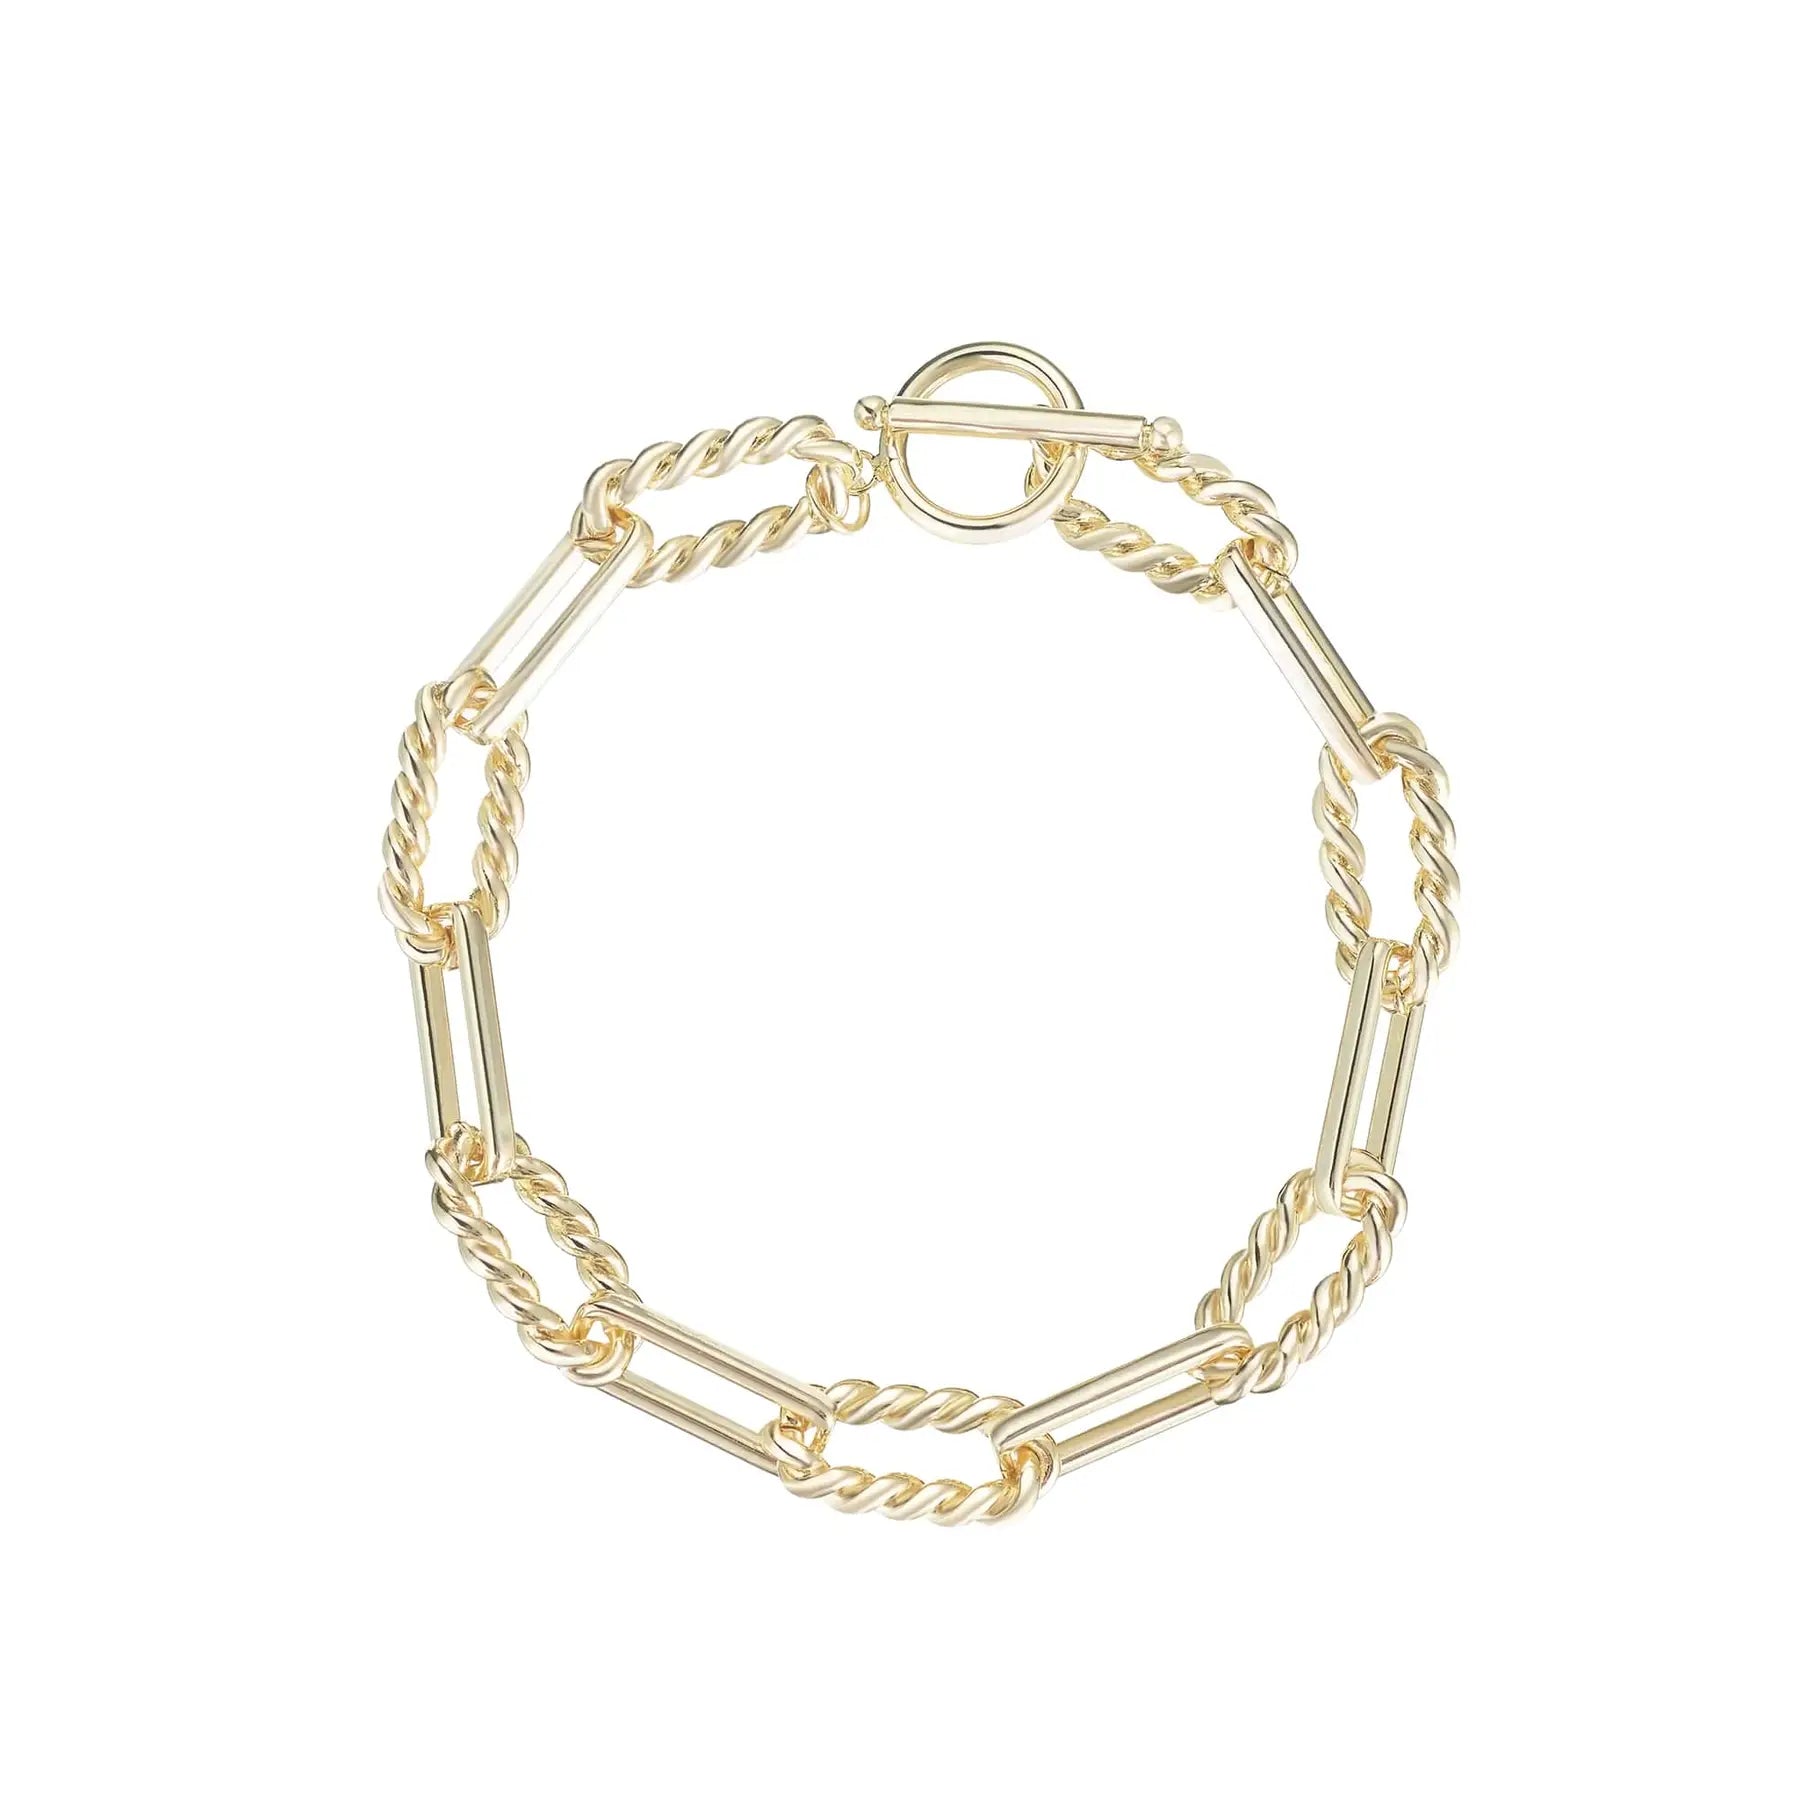 Natalie Wood - She's Spicy Chain Link Bracelet in Gold-110 Jewelry & Hair-Natalie Wood-July & June Women's Fashion Boutique Located in San Antonio, Texas